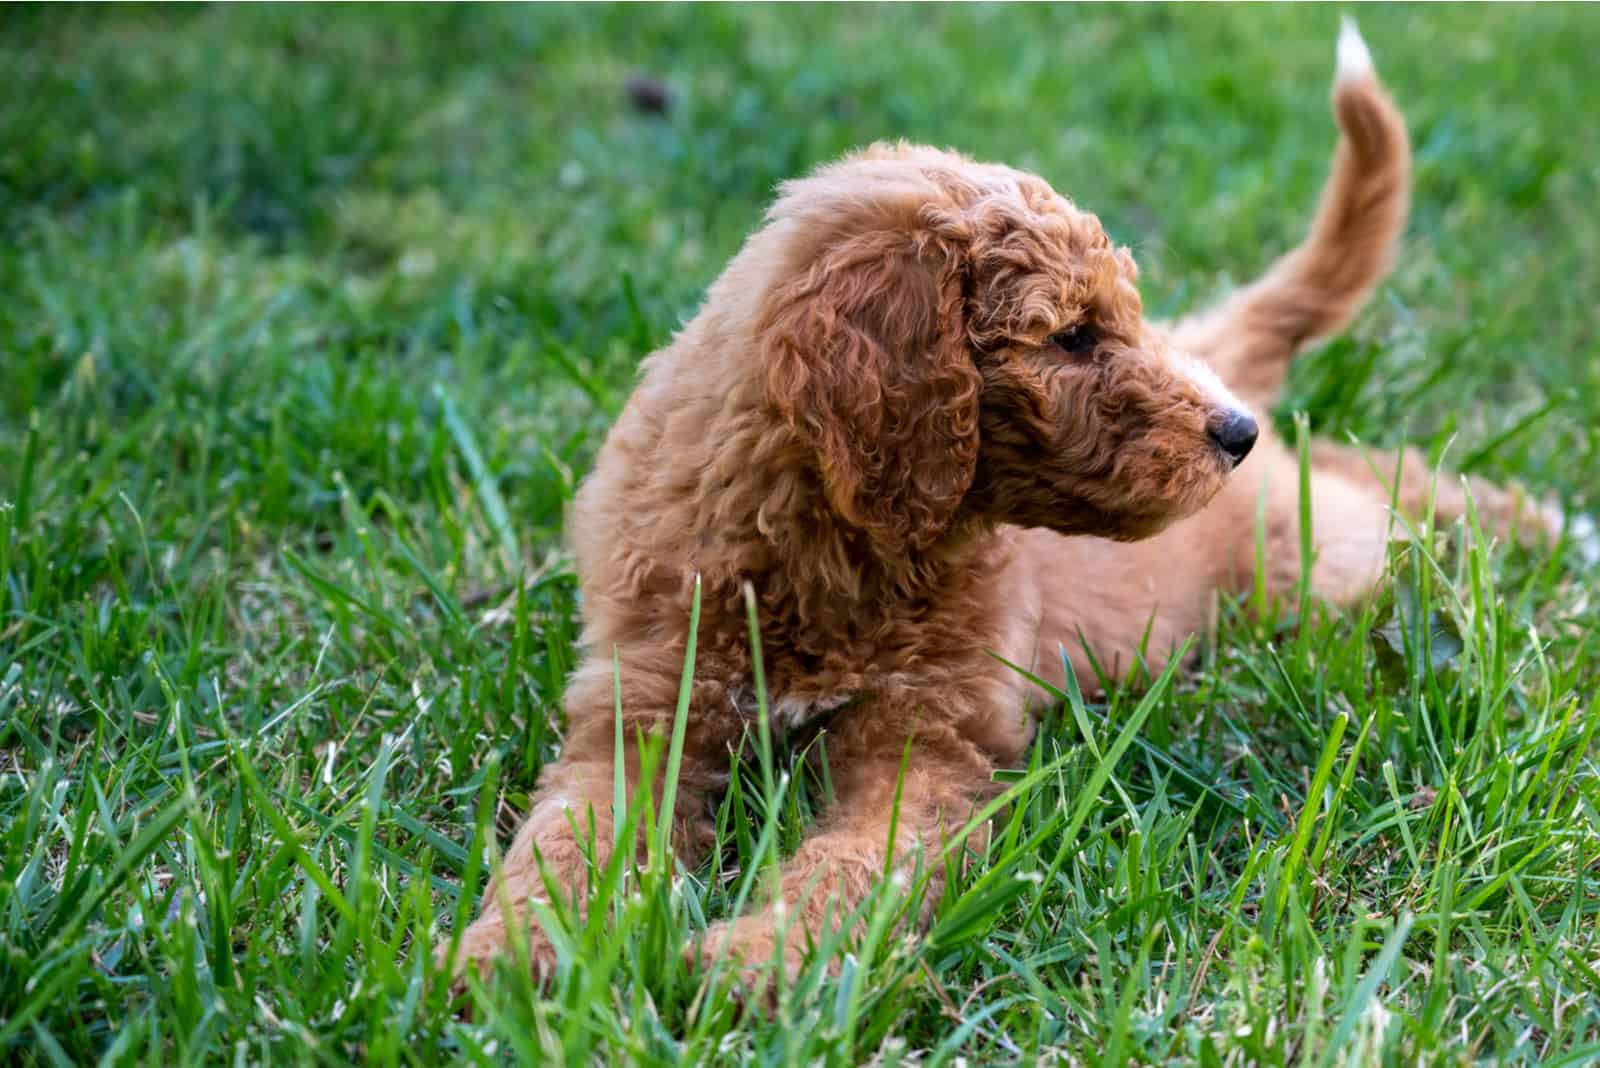 Goldendoodle lies on the grass and looks away